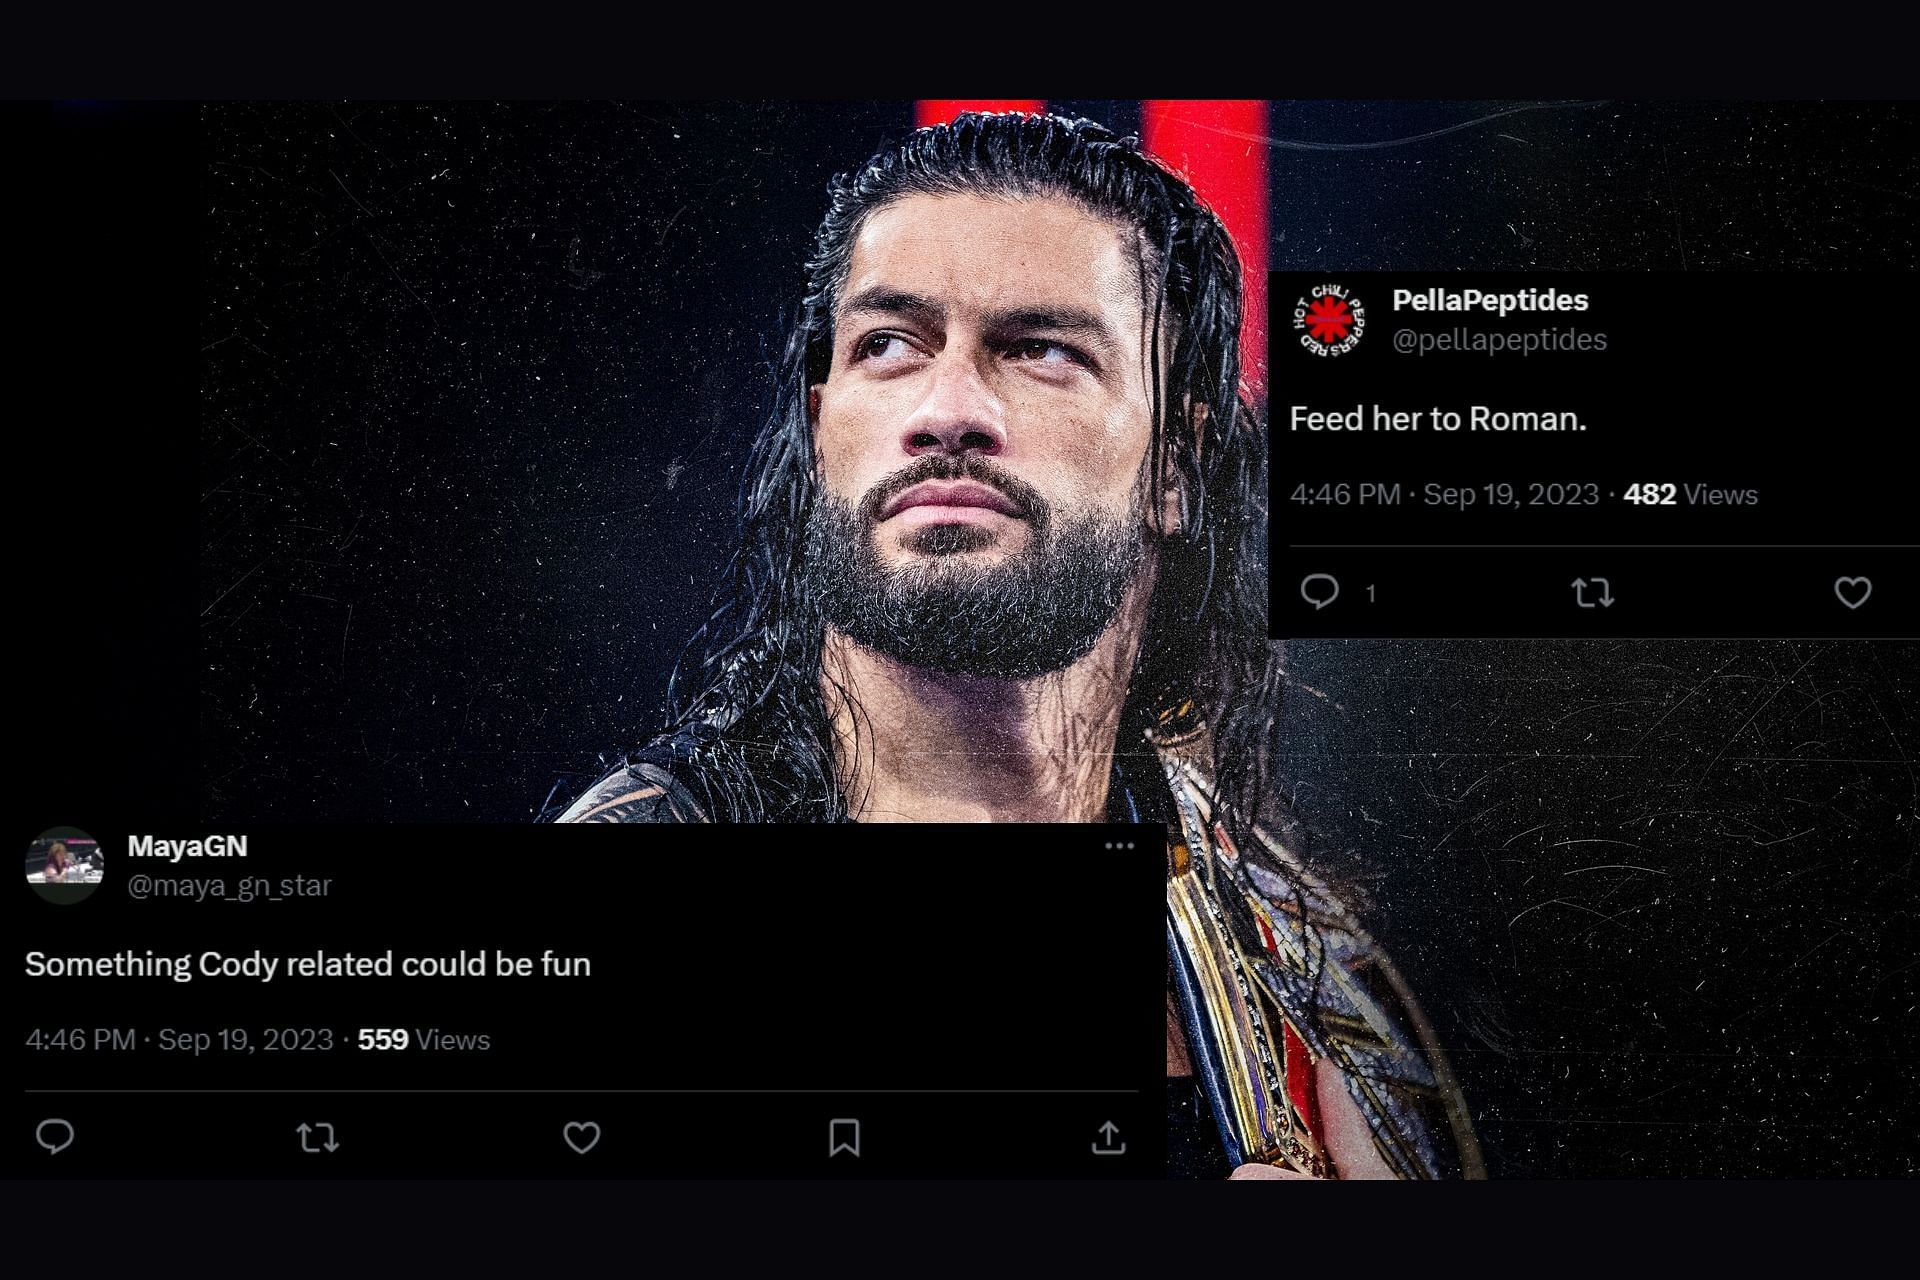 Fans have ideas for Roman Reigns to take on a new opponent